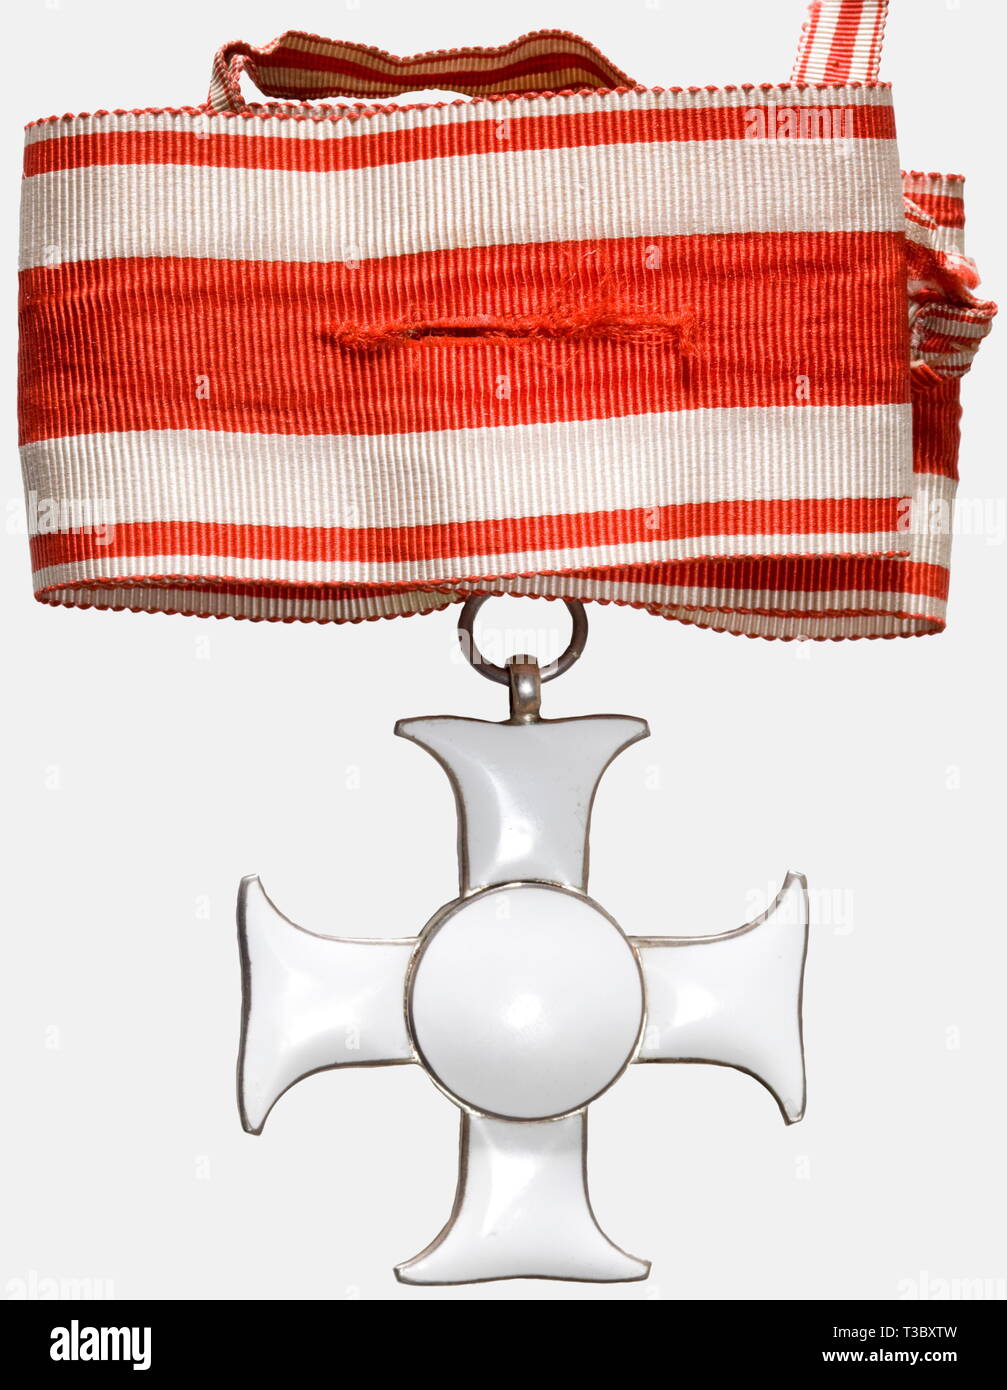 A Military Merit Cross 2nd Class, Austria, 1st Republic 1918 - 1938 Silver and white enamel, the red translucent enamel border of the cross and medallion over a diamond-cut background. Gilt medallion eagle. Unmarked. Dimensions 57 x 51 mm, weight 41 g. Wide suspension ring. With original neck ribbon. There were only nine awards of the Military Merit Cross 2nd Class between 1918 and 1938. This example was awarded in 1937. The name of the recipient will be revealed to the successful bidder. Of extreme rareness. historic, historical, 1910s, 1920s, 1930s, 20th century, 20th centu, No-Exclusive-Use Stock Photo